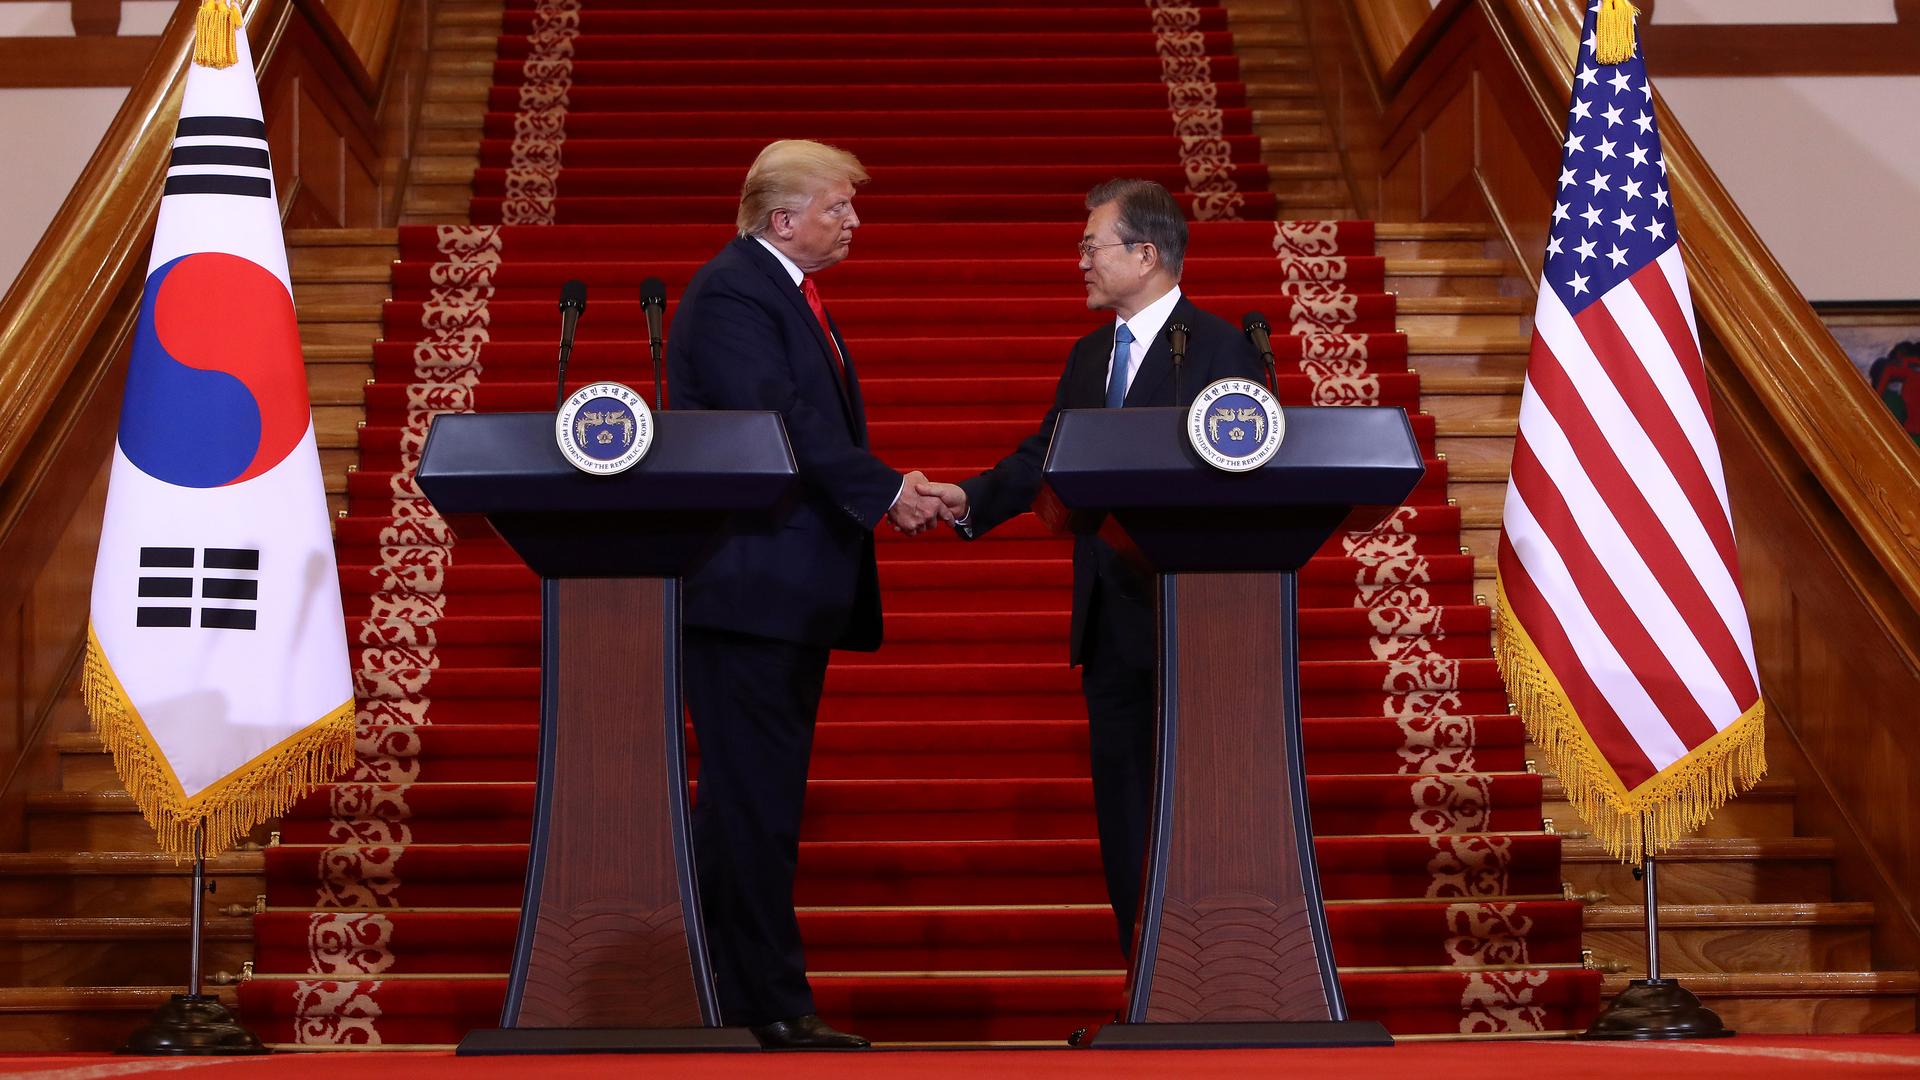 US President Donald Trump, left, greets South Korean President Moon Jae-in during a joint news conference at the presidential Blue House on June 30, 2019 in Seoul, South Korea.